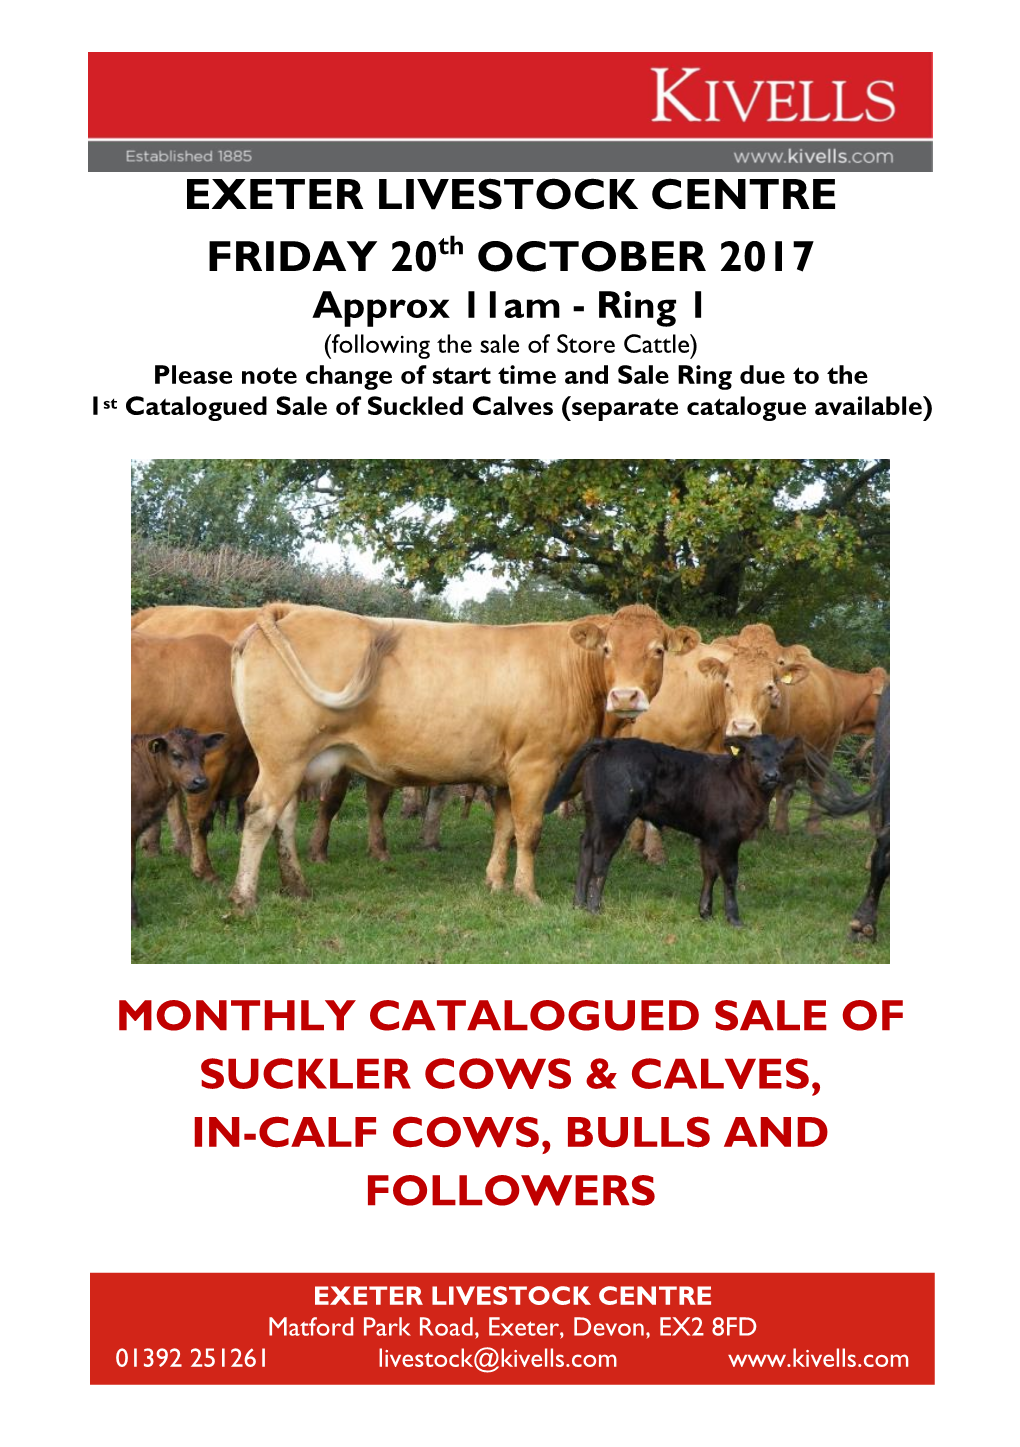 EXETER LIVESTOCK CENTRE FRIDAY 20Th OCTOBER 2017